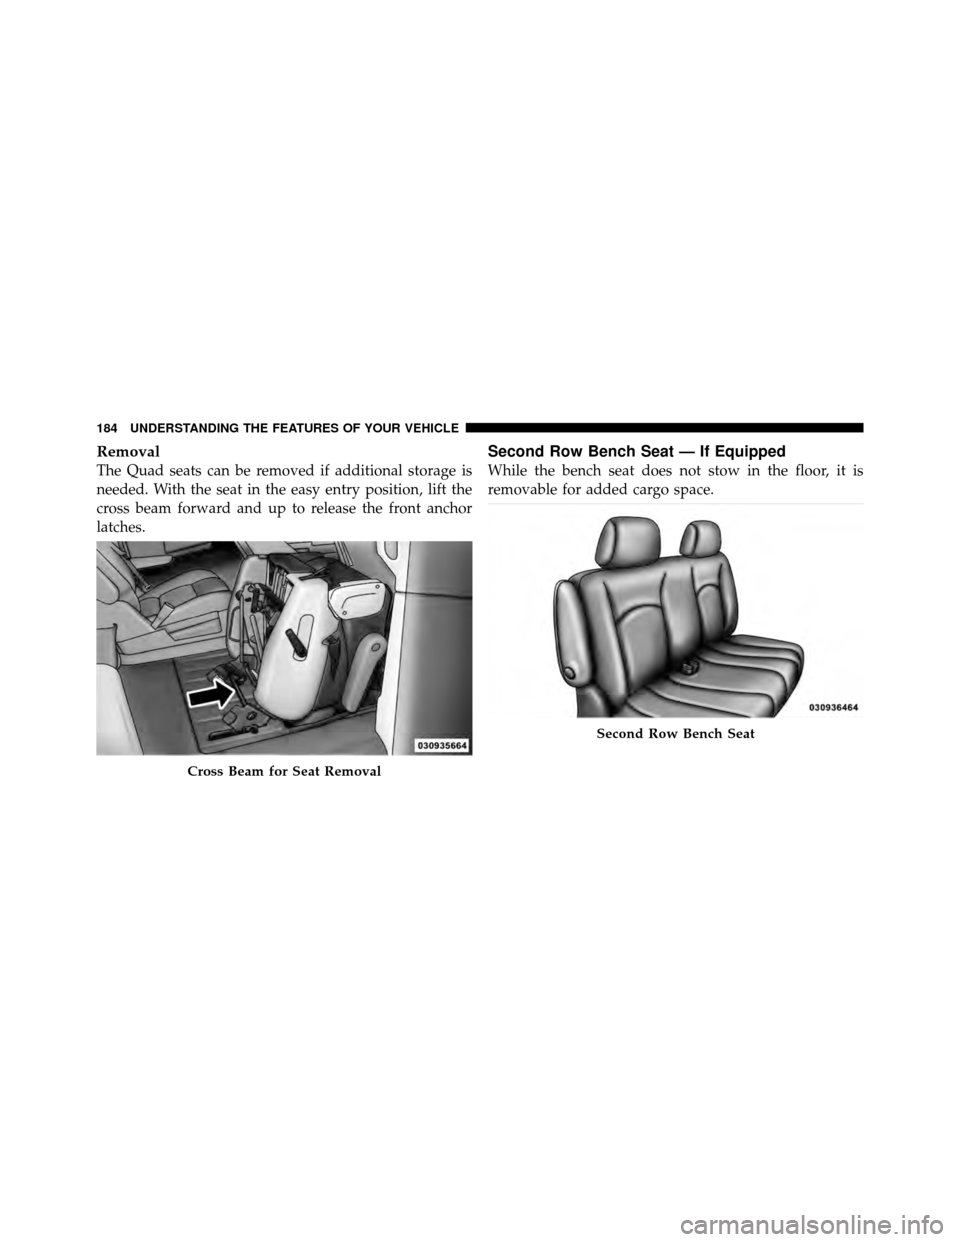 DODGE GRAND CARAVAN 2012 5.G Owners Manual Removal
The Quad seats can be removed if additional storage is
needed. With the seat in the easy entry position, lift the
cross beam forward and up to release the front anchor
latches.
Second Row Benc